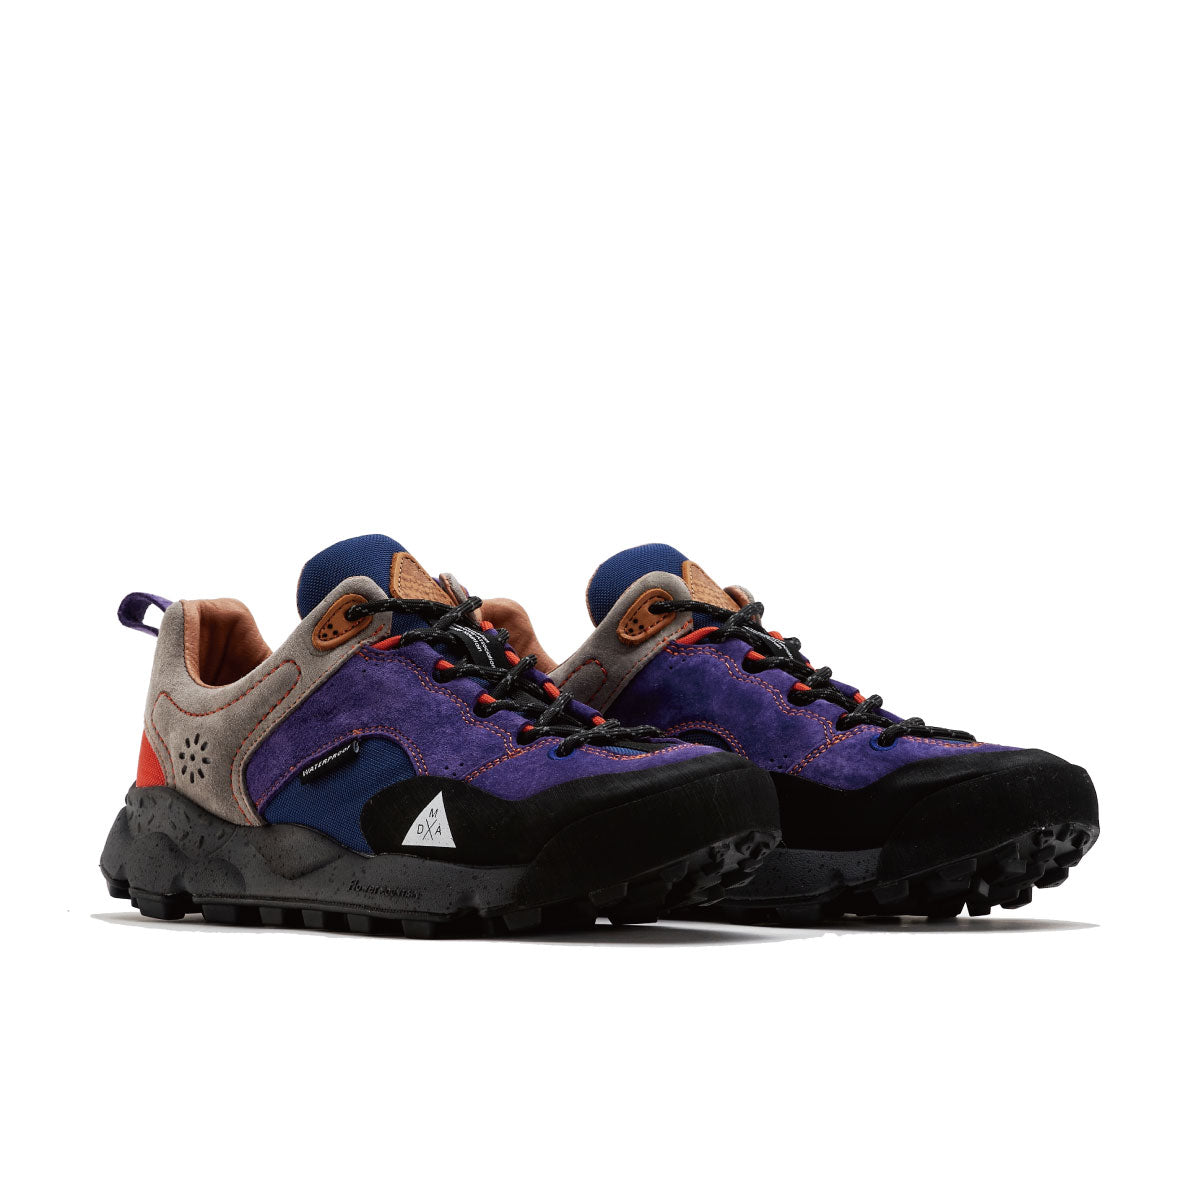 BACK COUNTRY Purple/Navy FM66-1-018